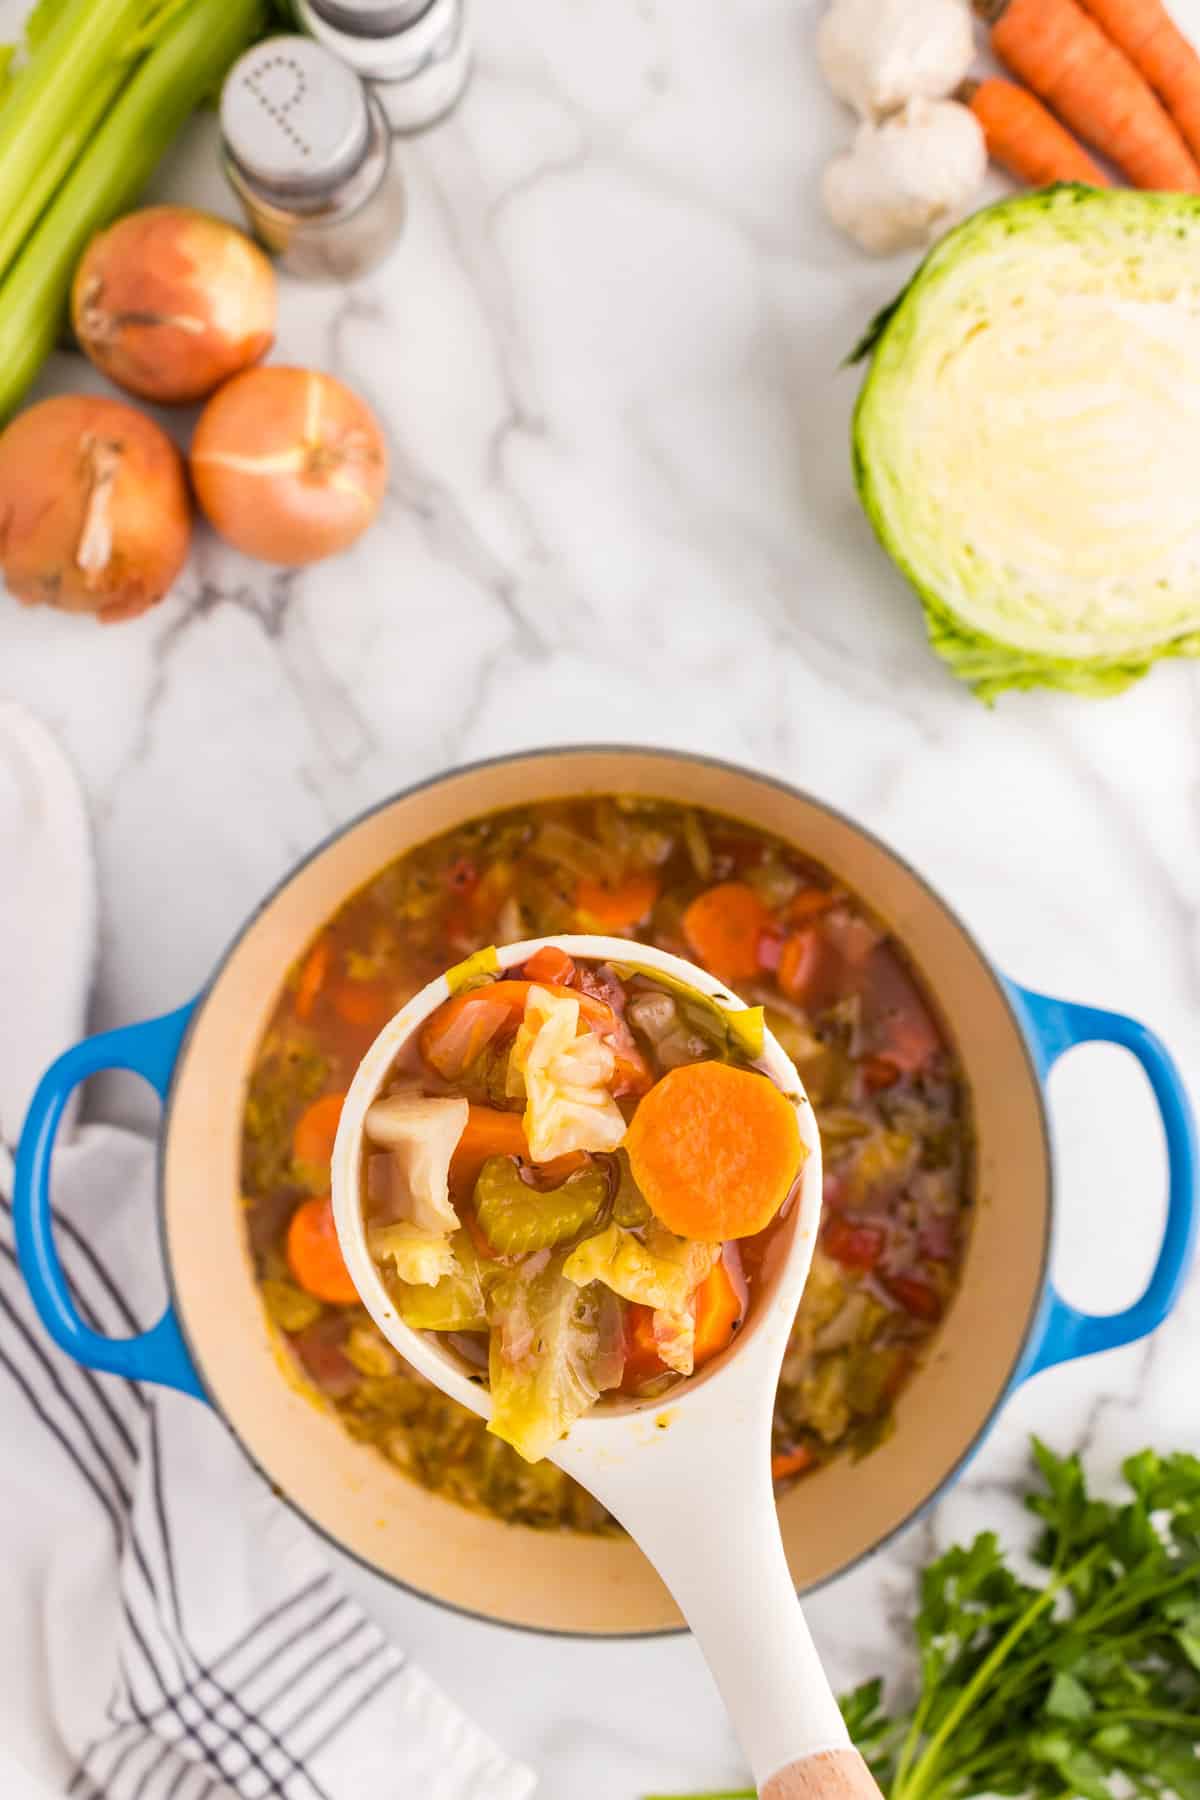 Using spoon to scoop Cabbage Vegetable Soup from Dutch Oven